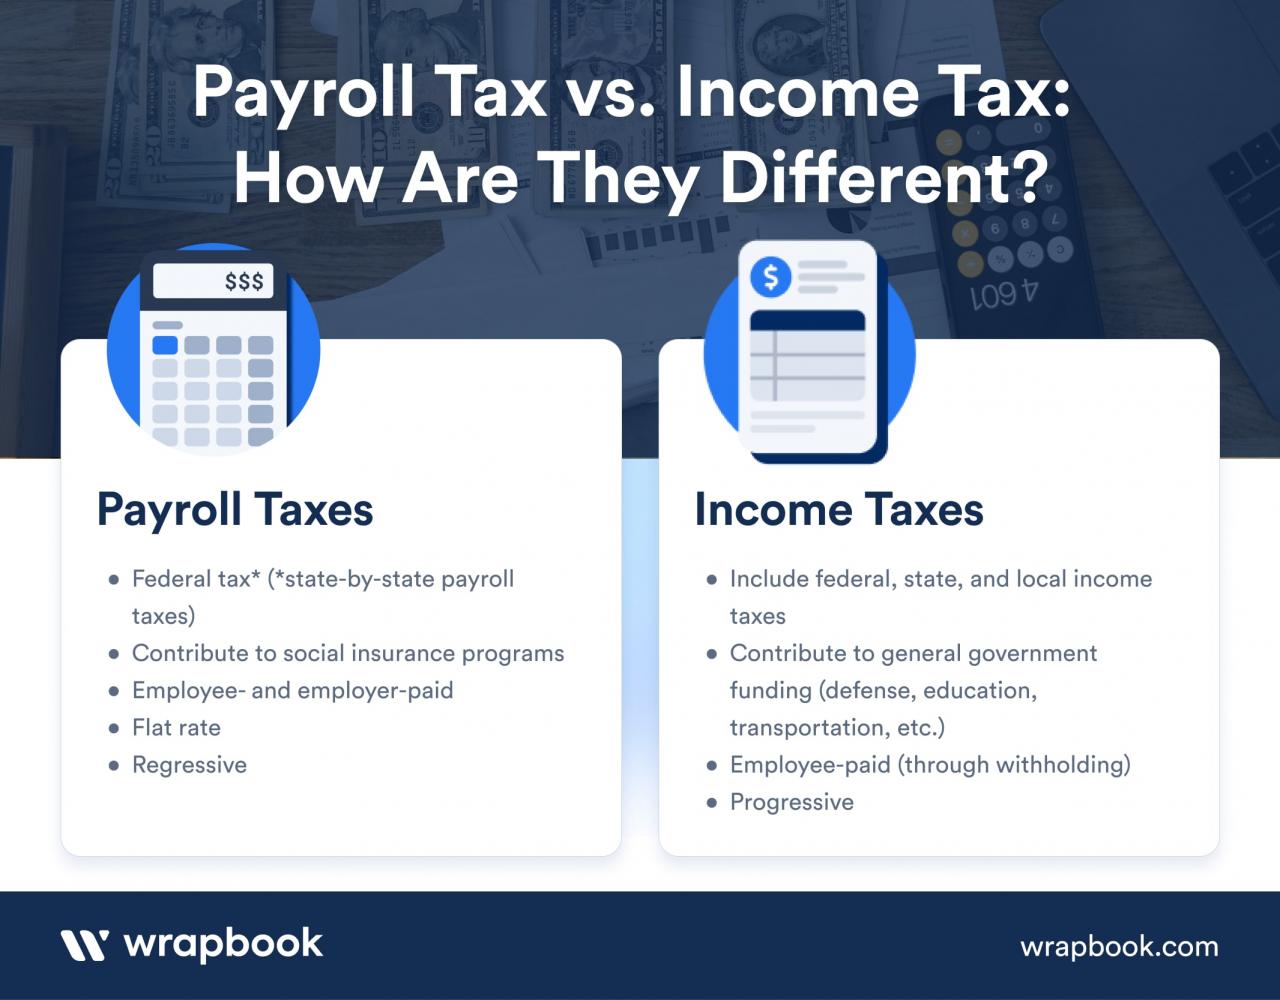 Does an employer pay taxes on employees